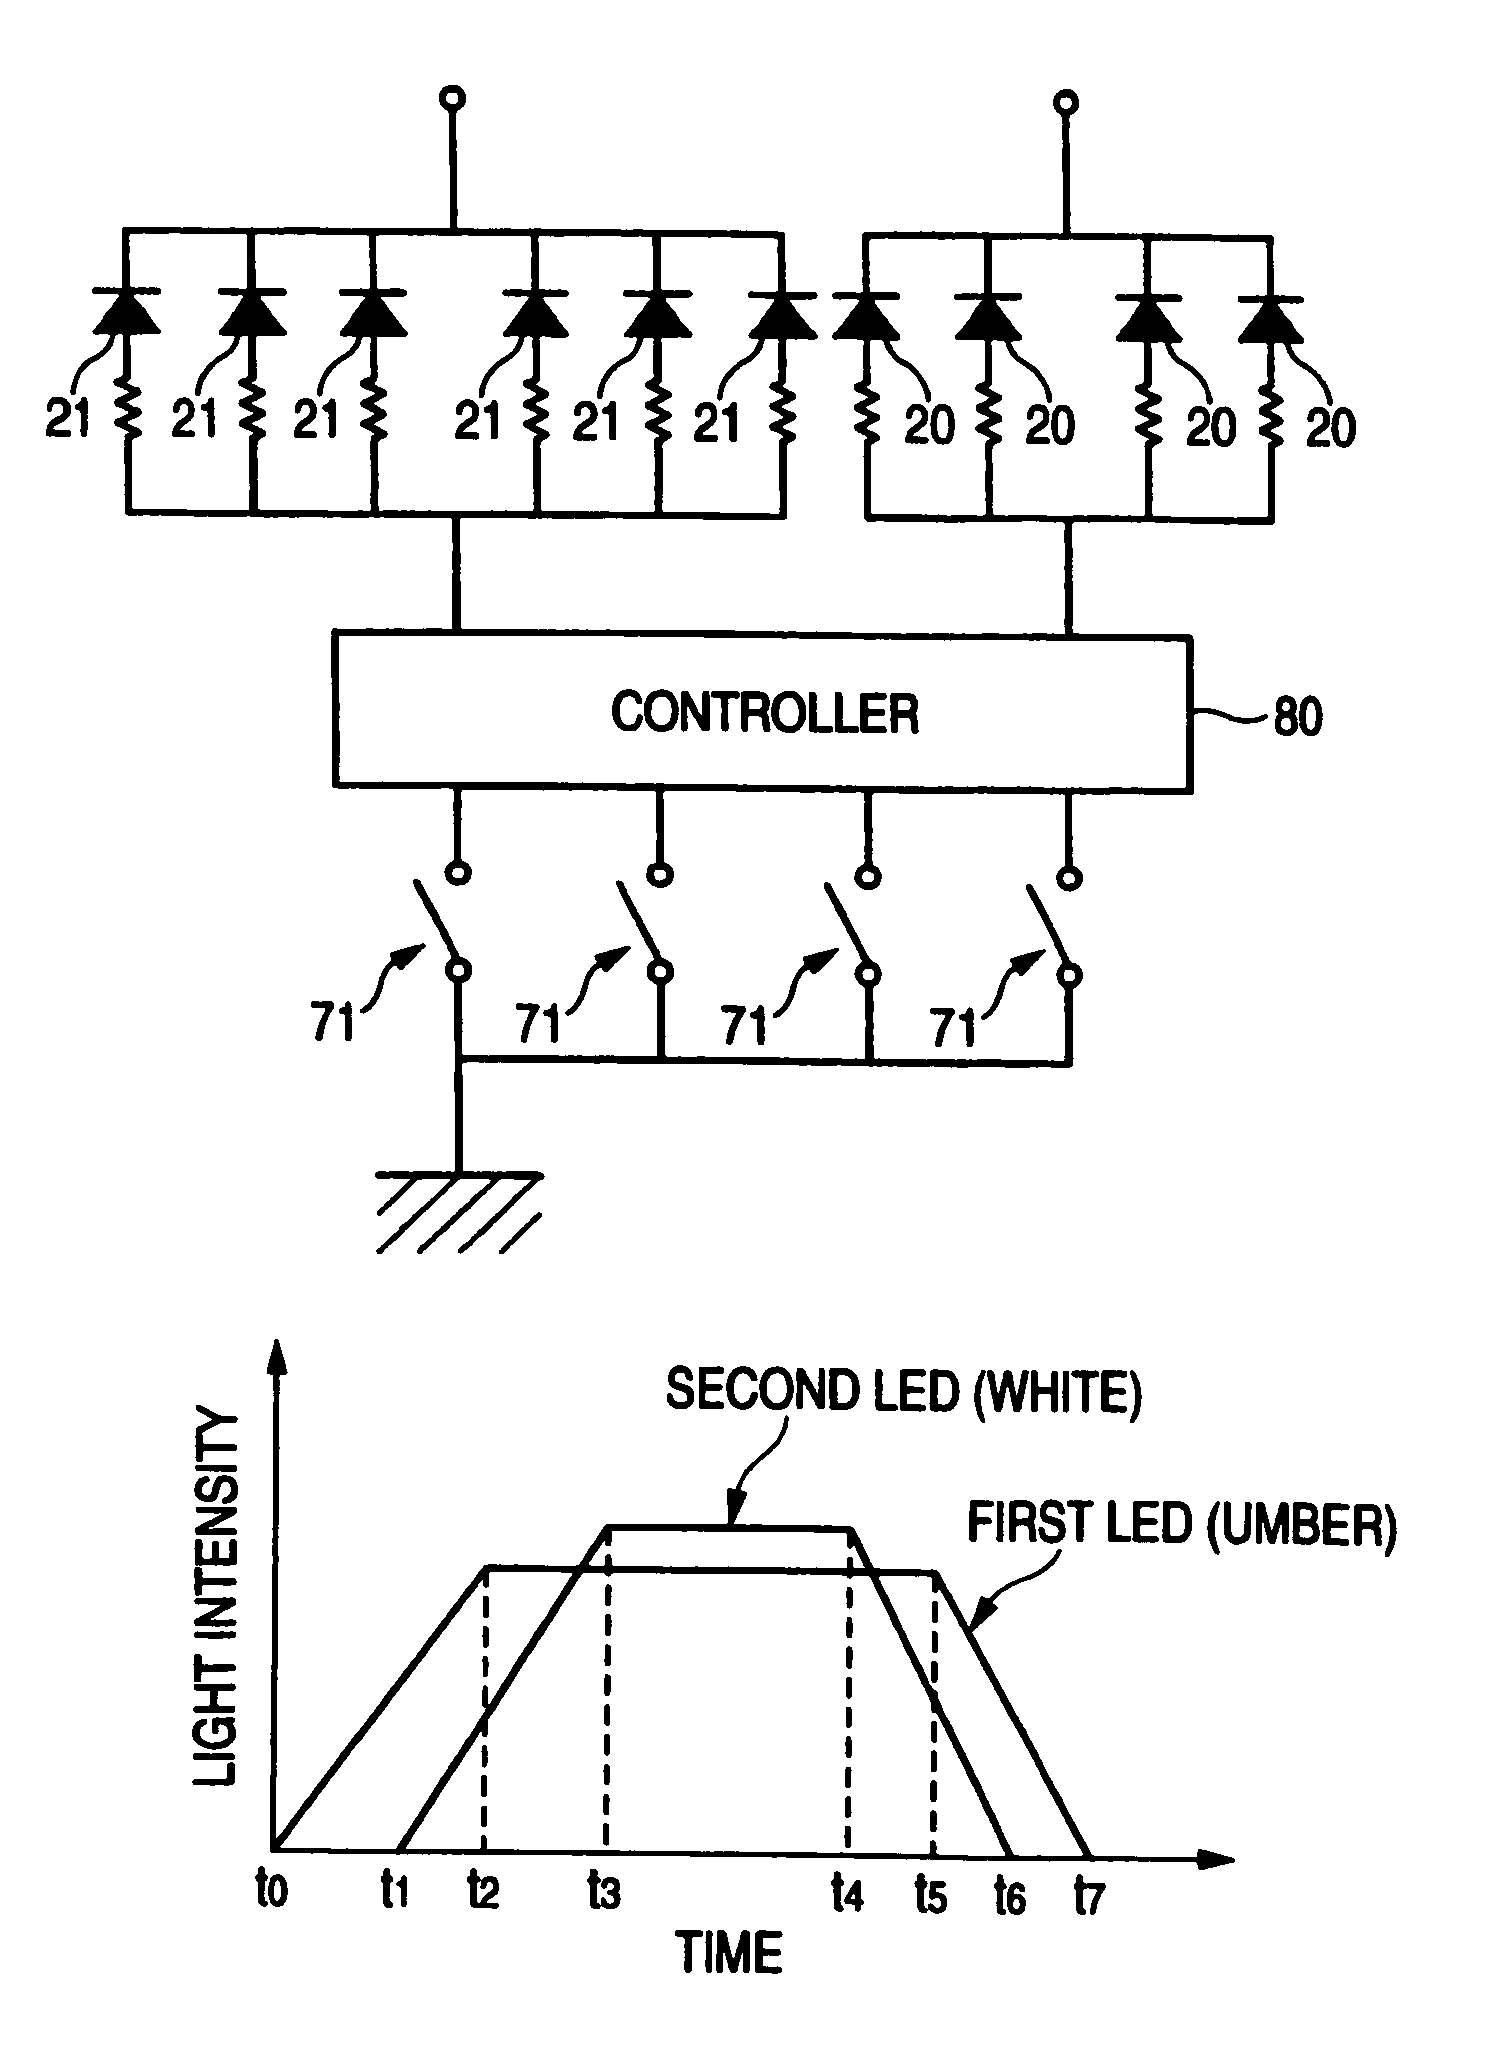 Illumination device for vehicle compartment